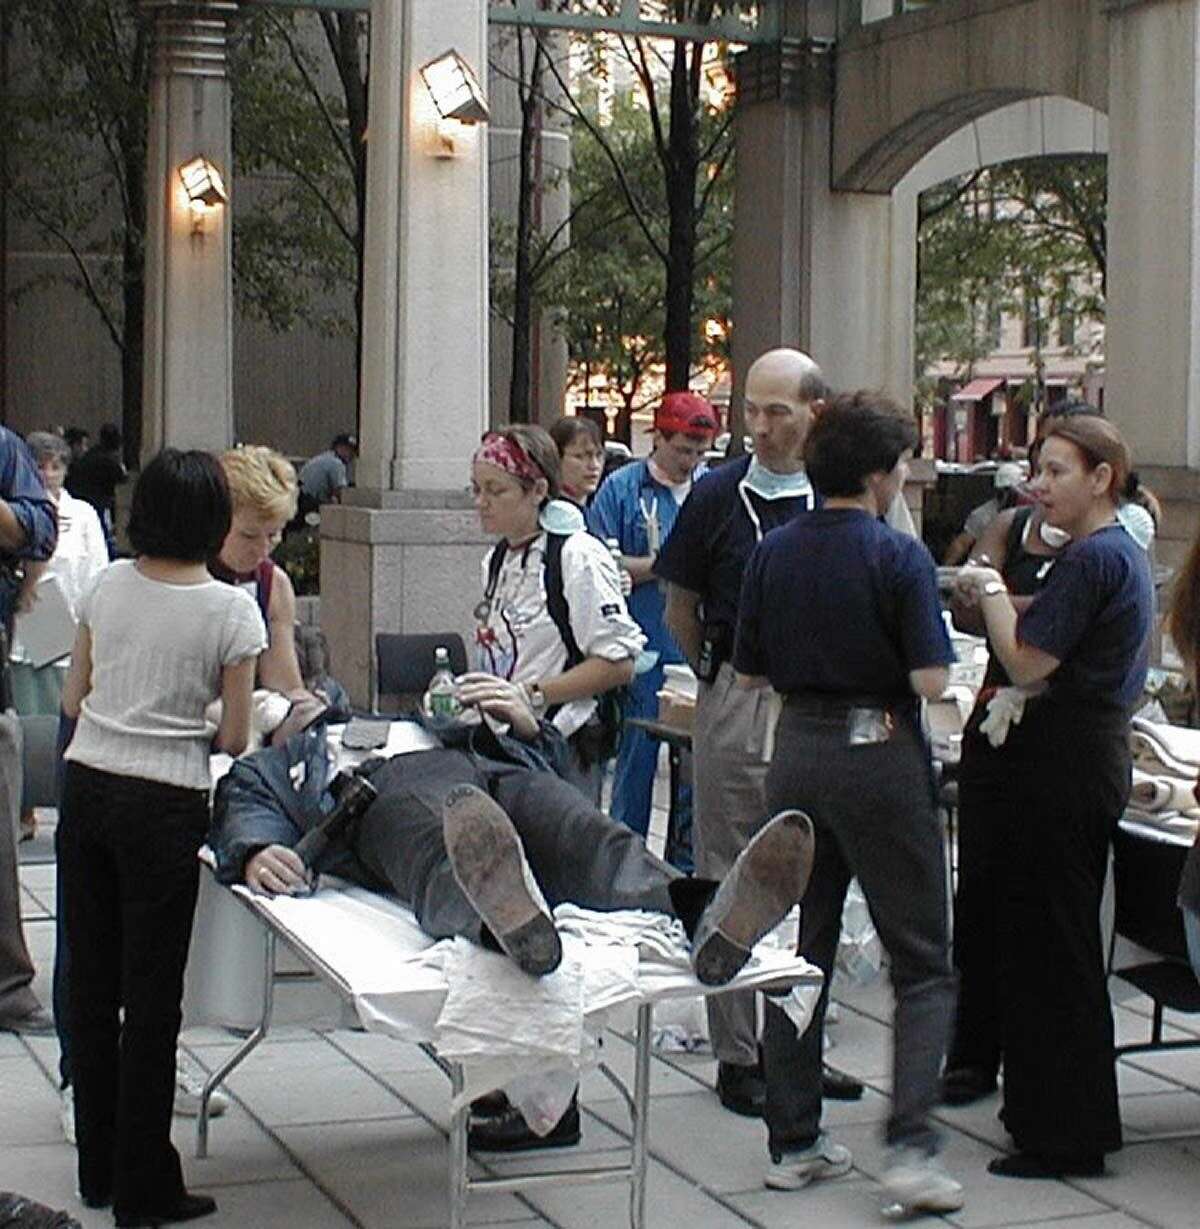 The triage site at the corner of Greenwich and North Moore streets. Dirk Stanley (in blue scrubs and red hat) works on a patient.